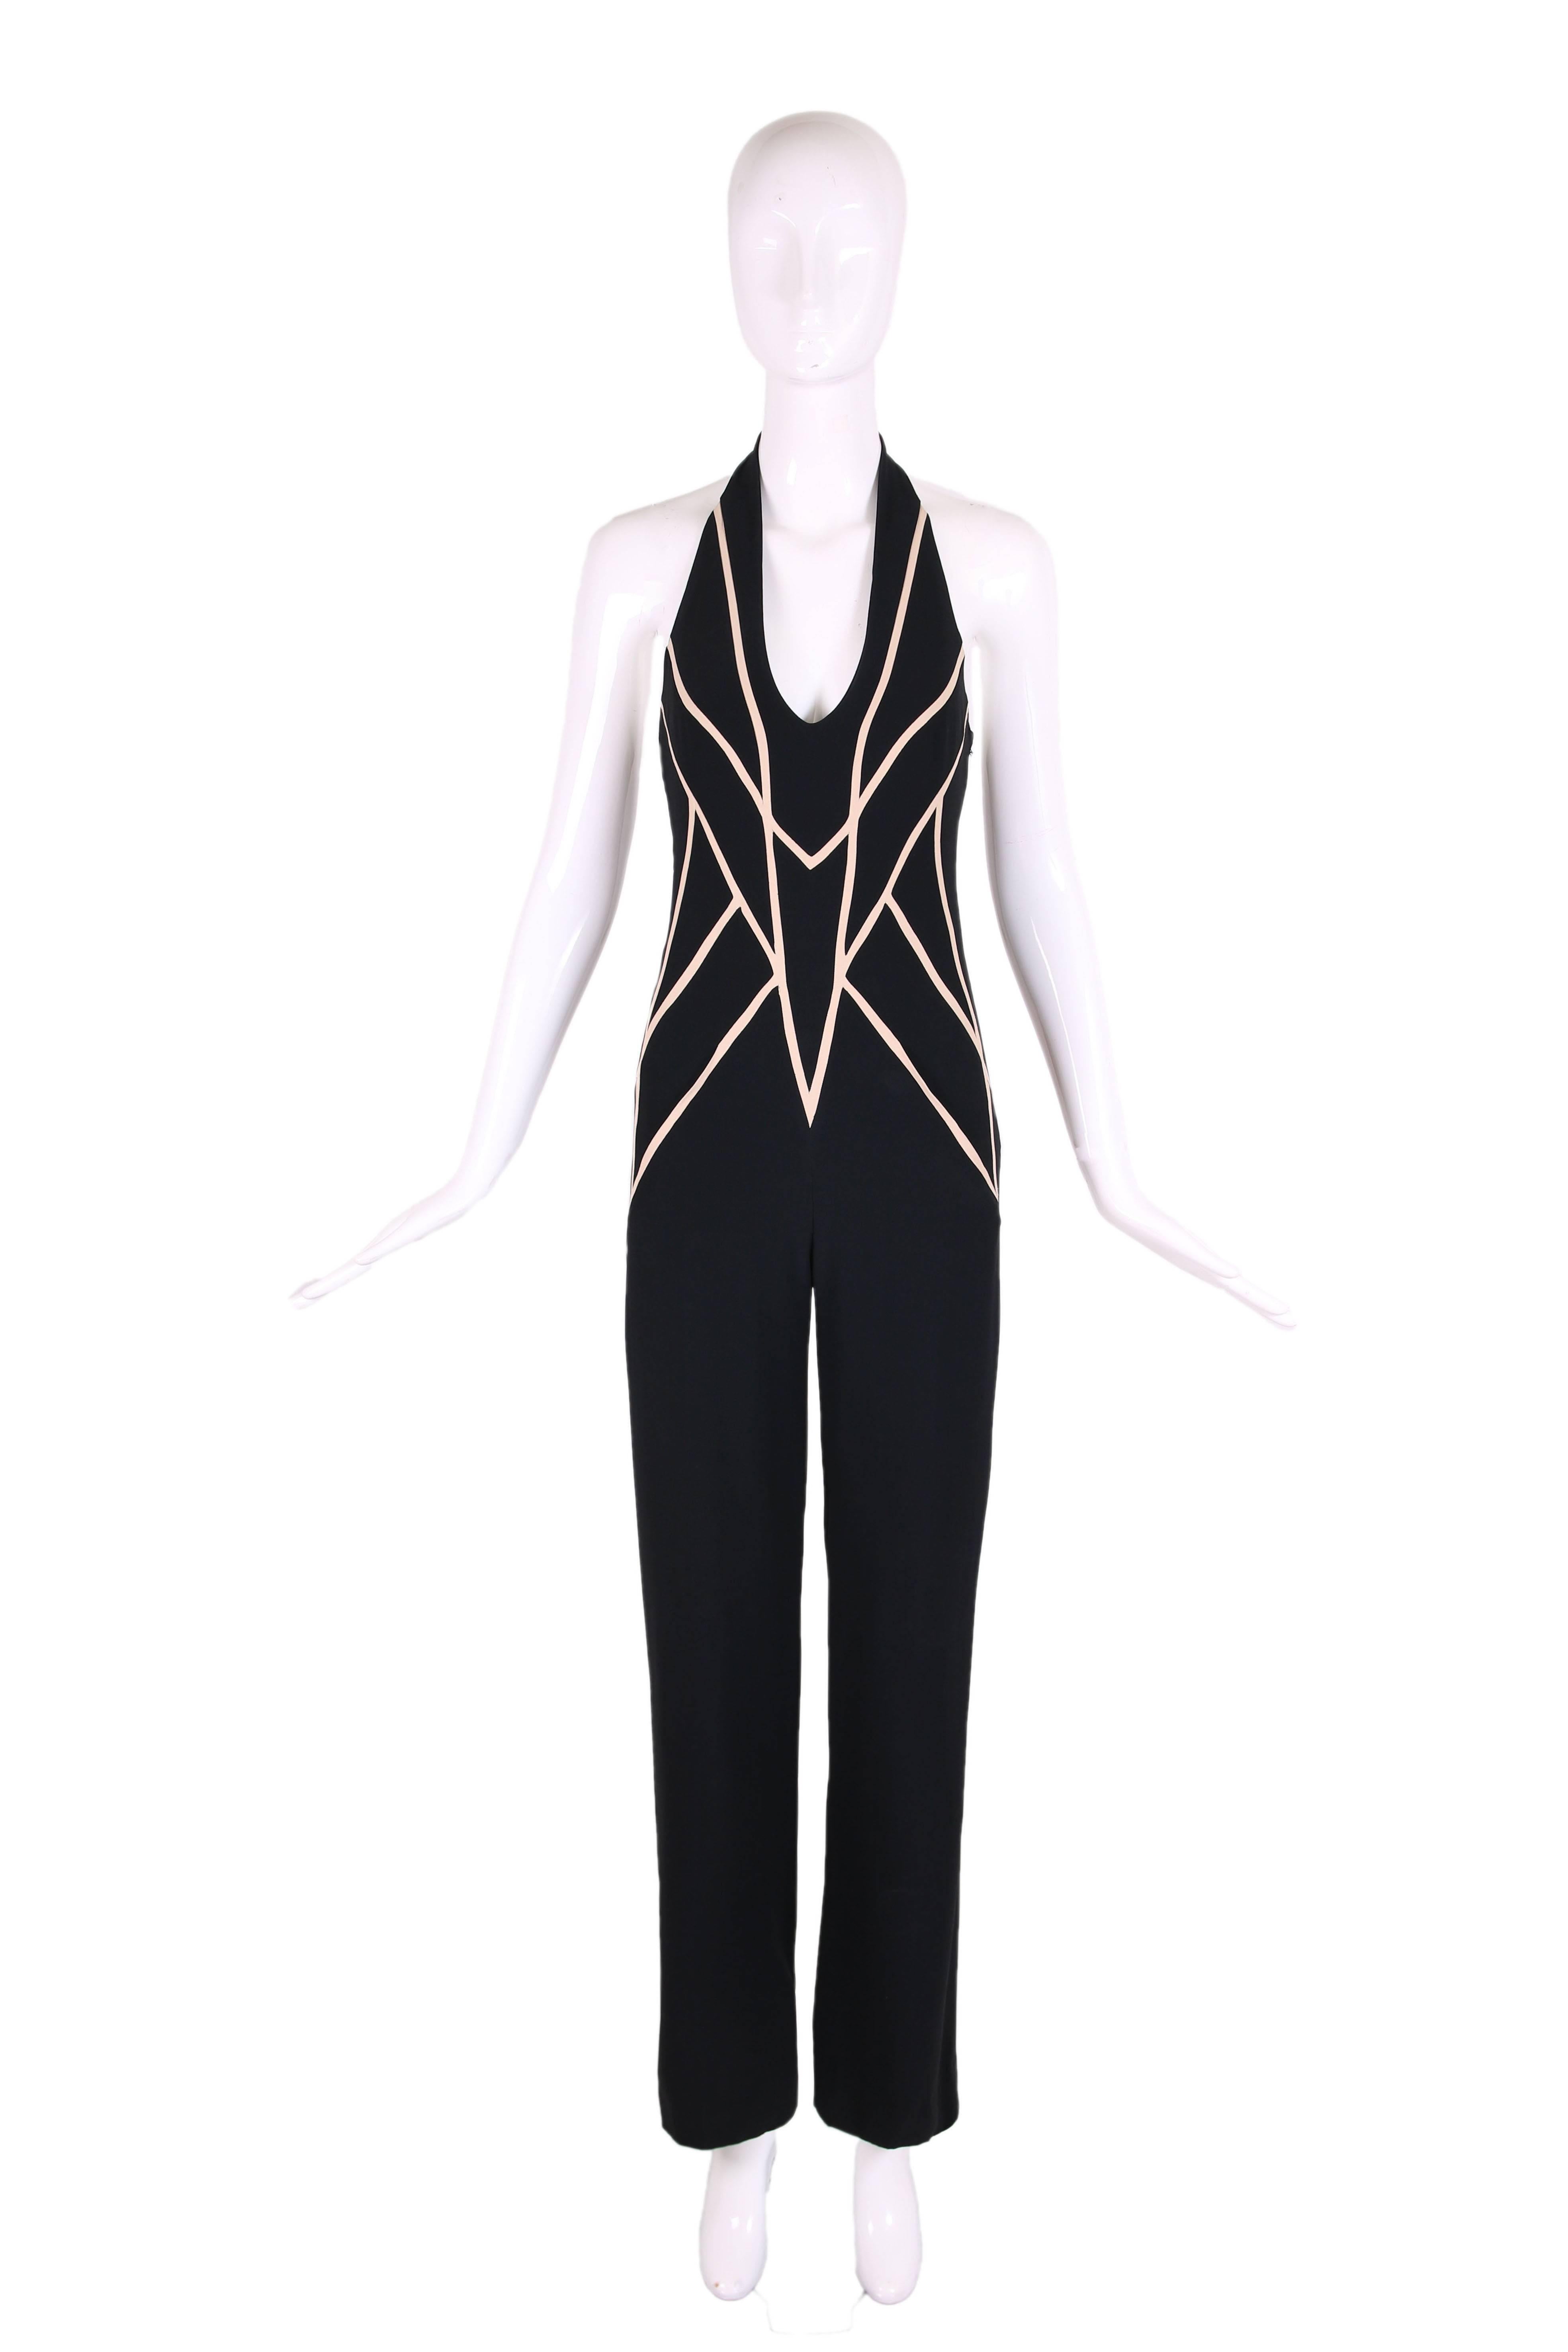 2008 Alexander McQueen black halter jumpsuit with cream-colored geometric motif at top front and back. Side zipper closure, and hook and eye closure at back neck. Fully lined. Fabric tag says acetate and viscose blend. Size UK38. In excellent